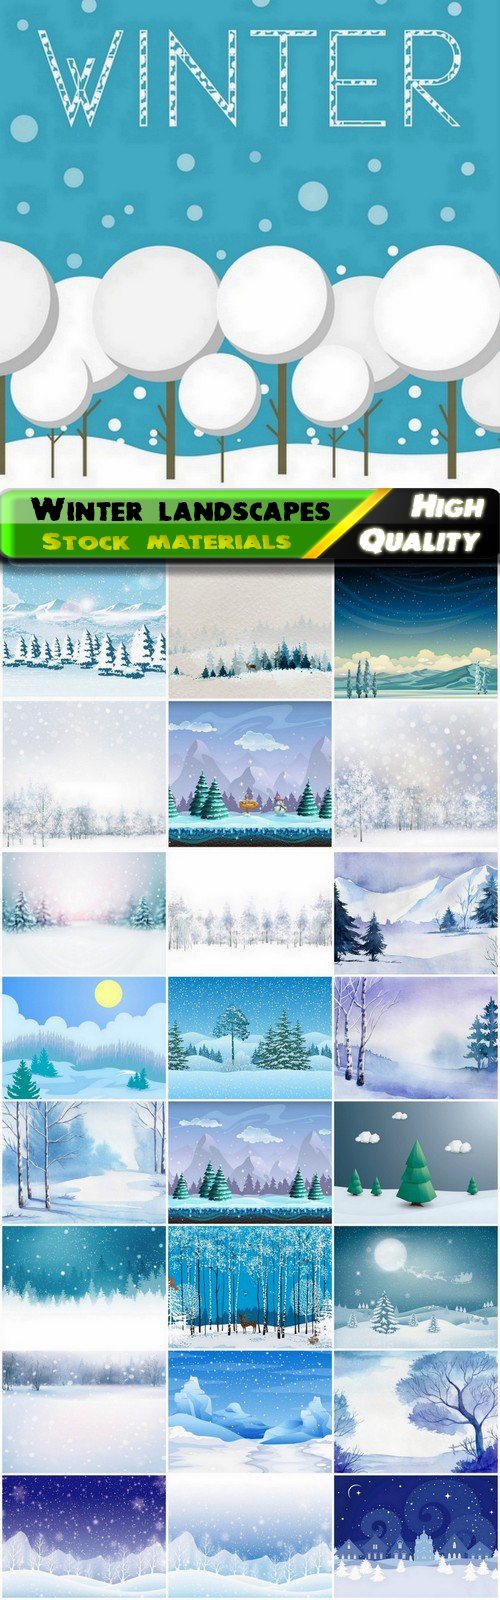 Winter nature landscapes with snow fir-tree forest - 25 Eps